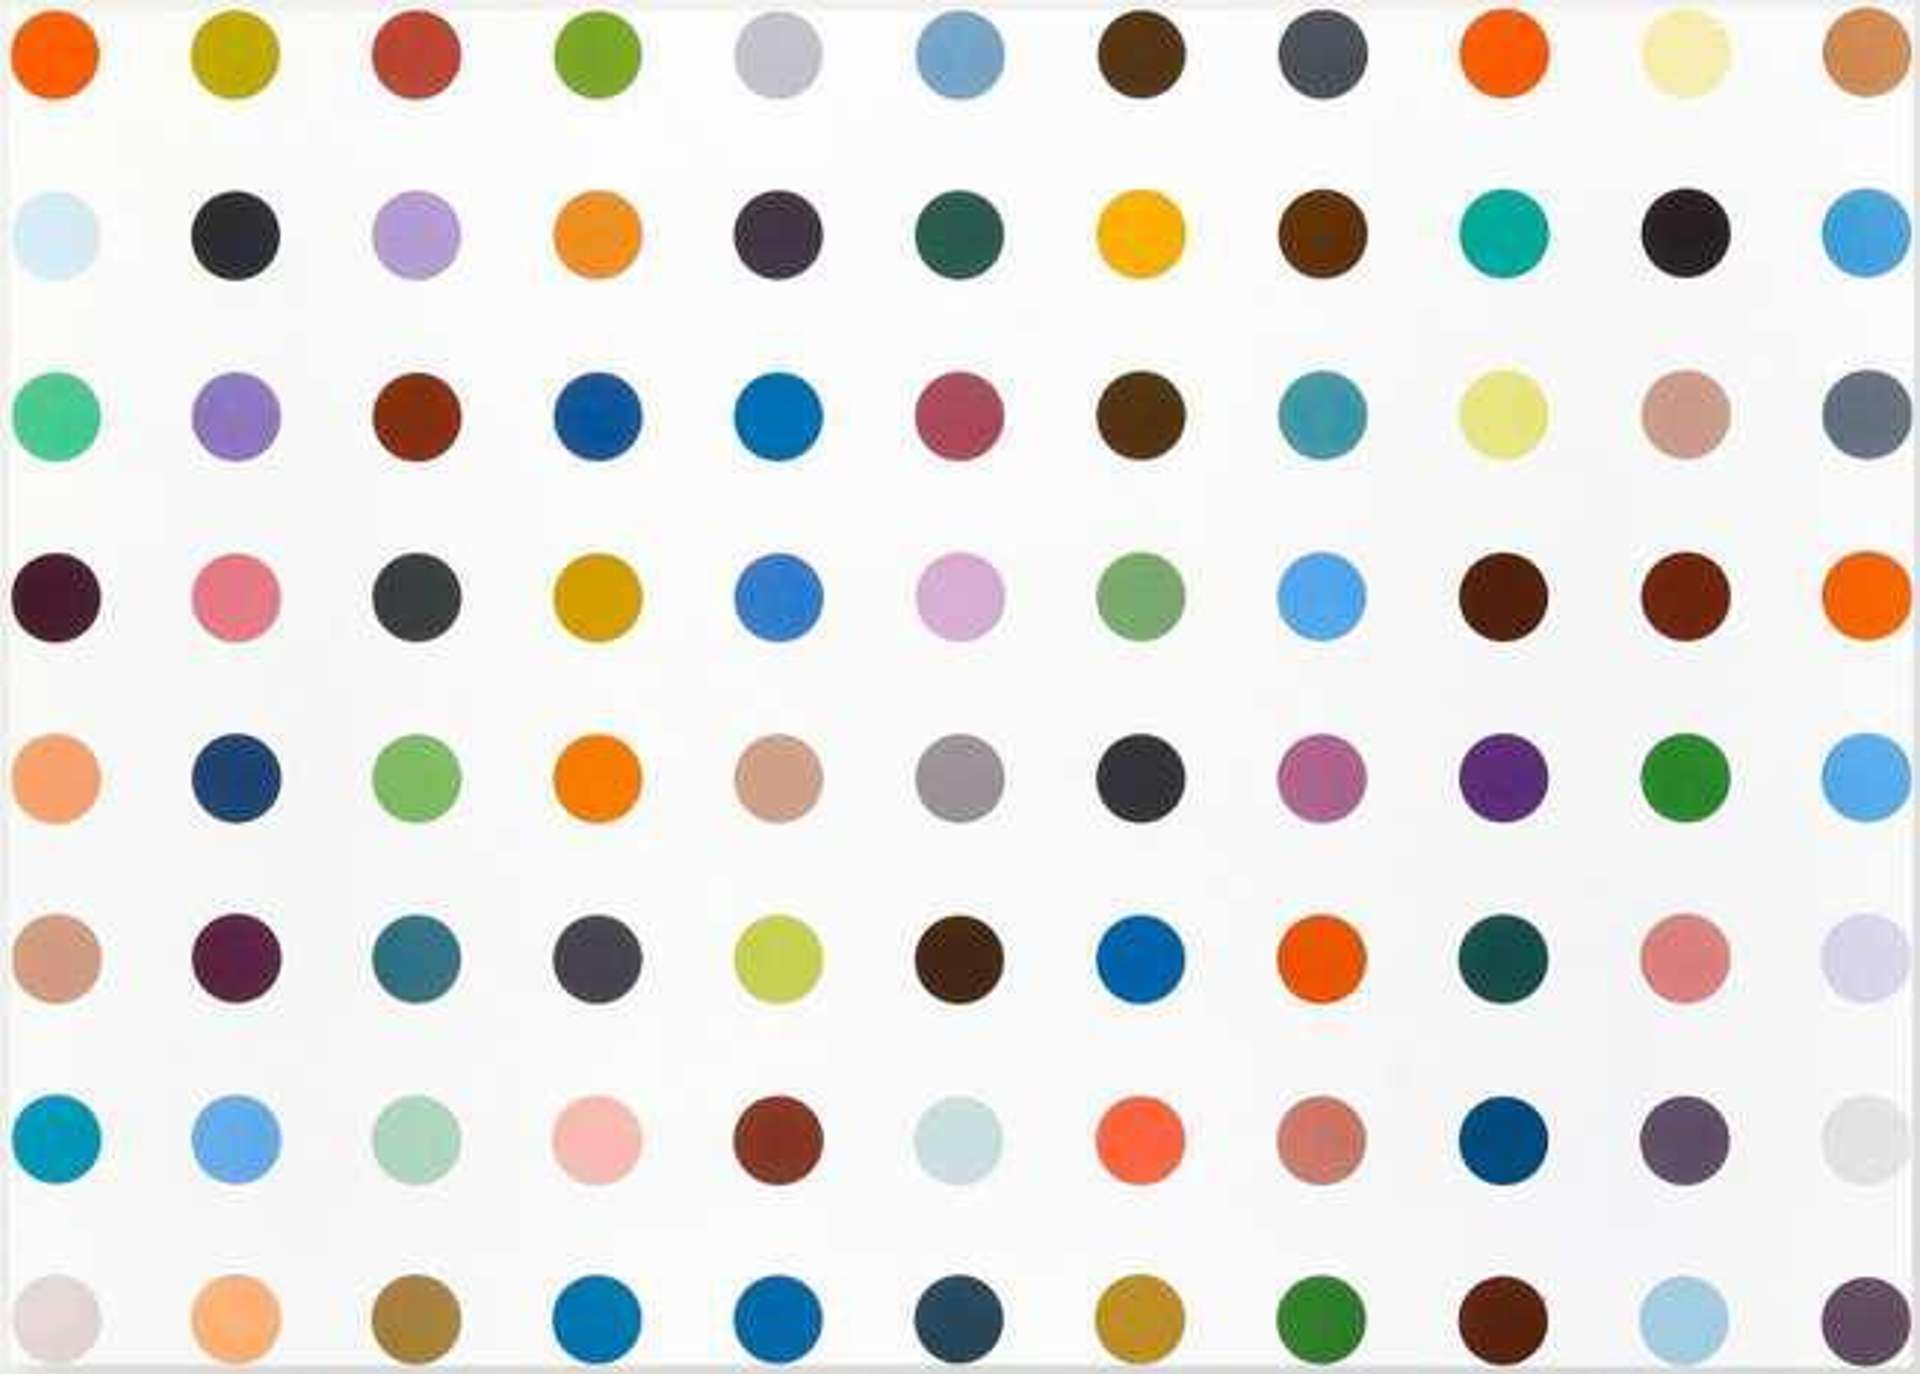 Damien Hirst: Postcard From Nucleohistone - Unsigned Print